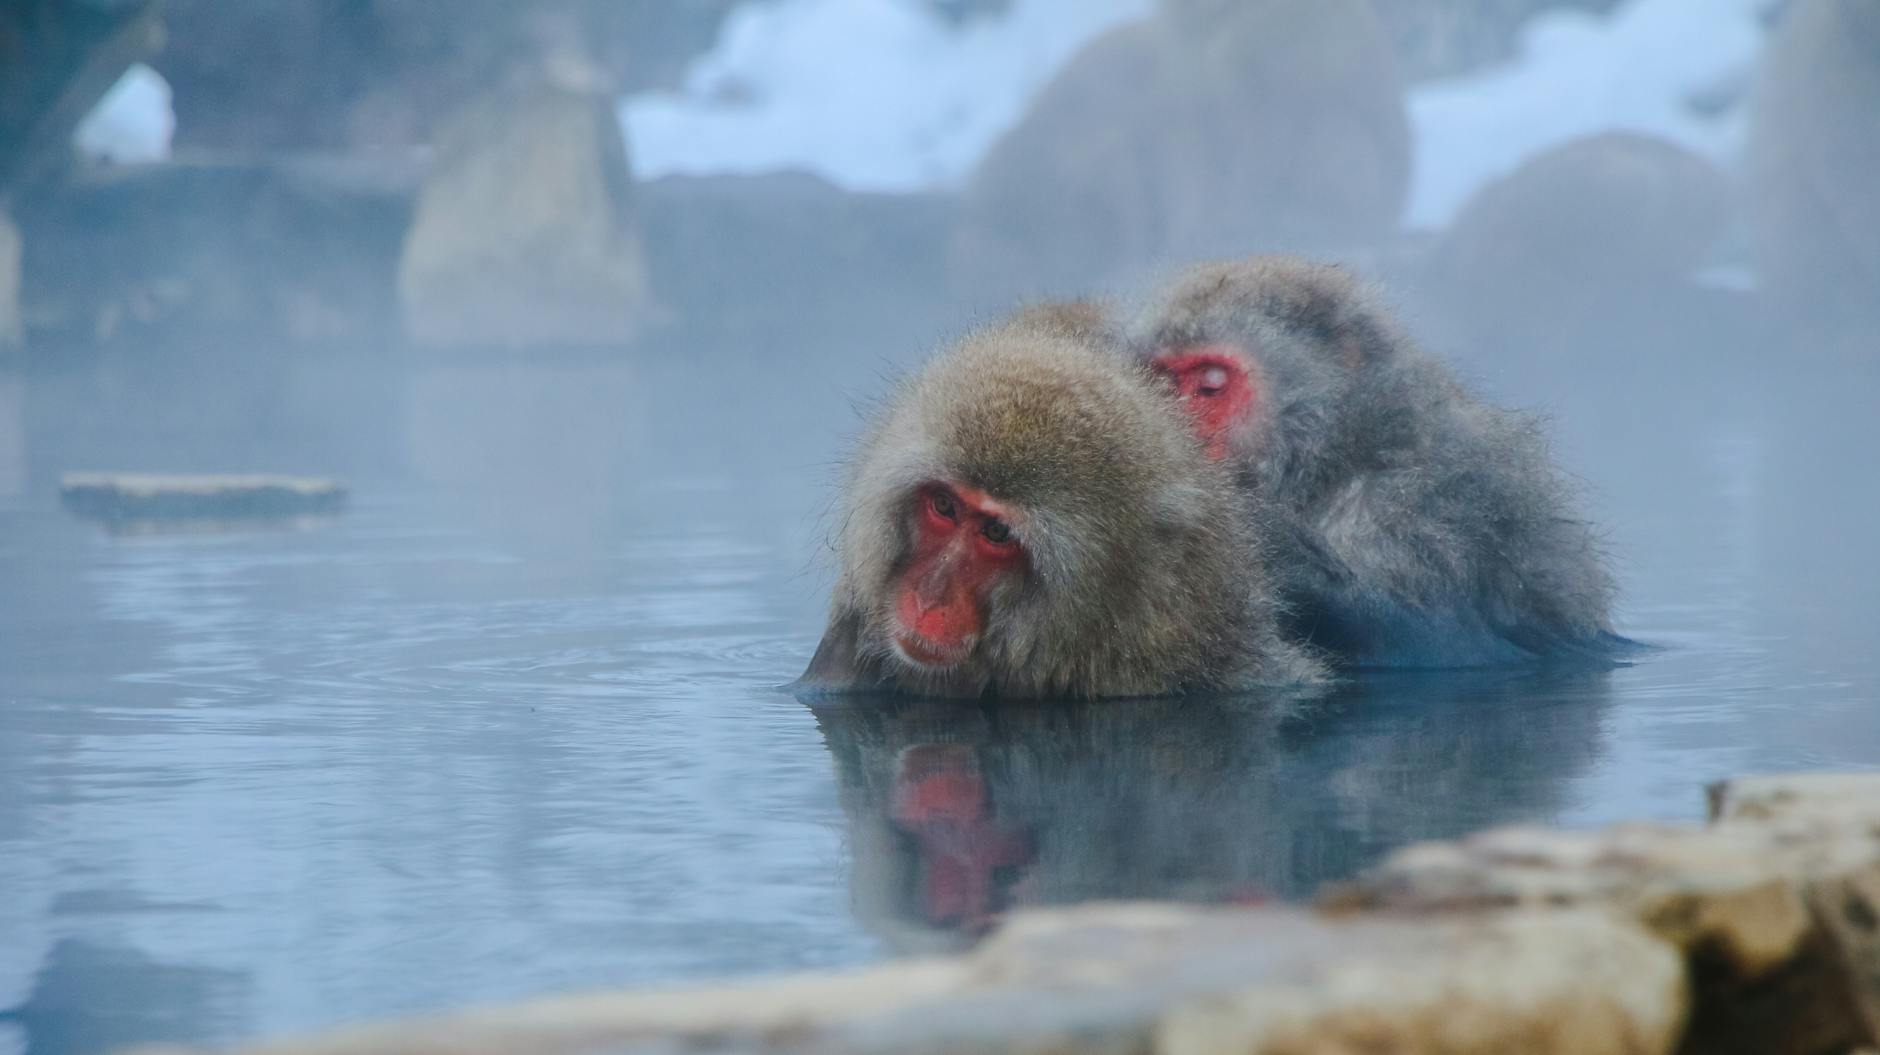 Two Monkeys Partially Submerged in Water